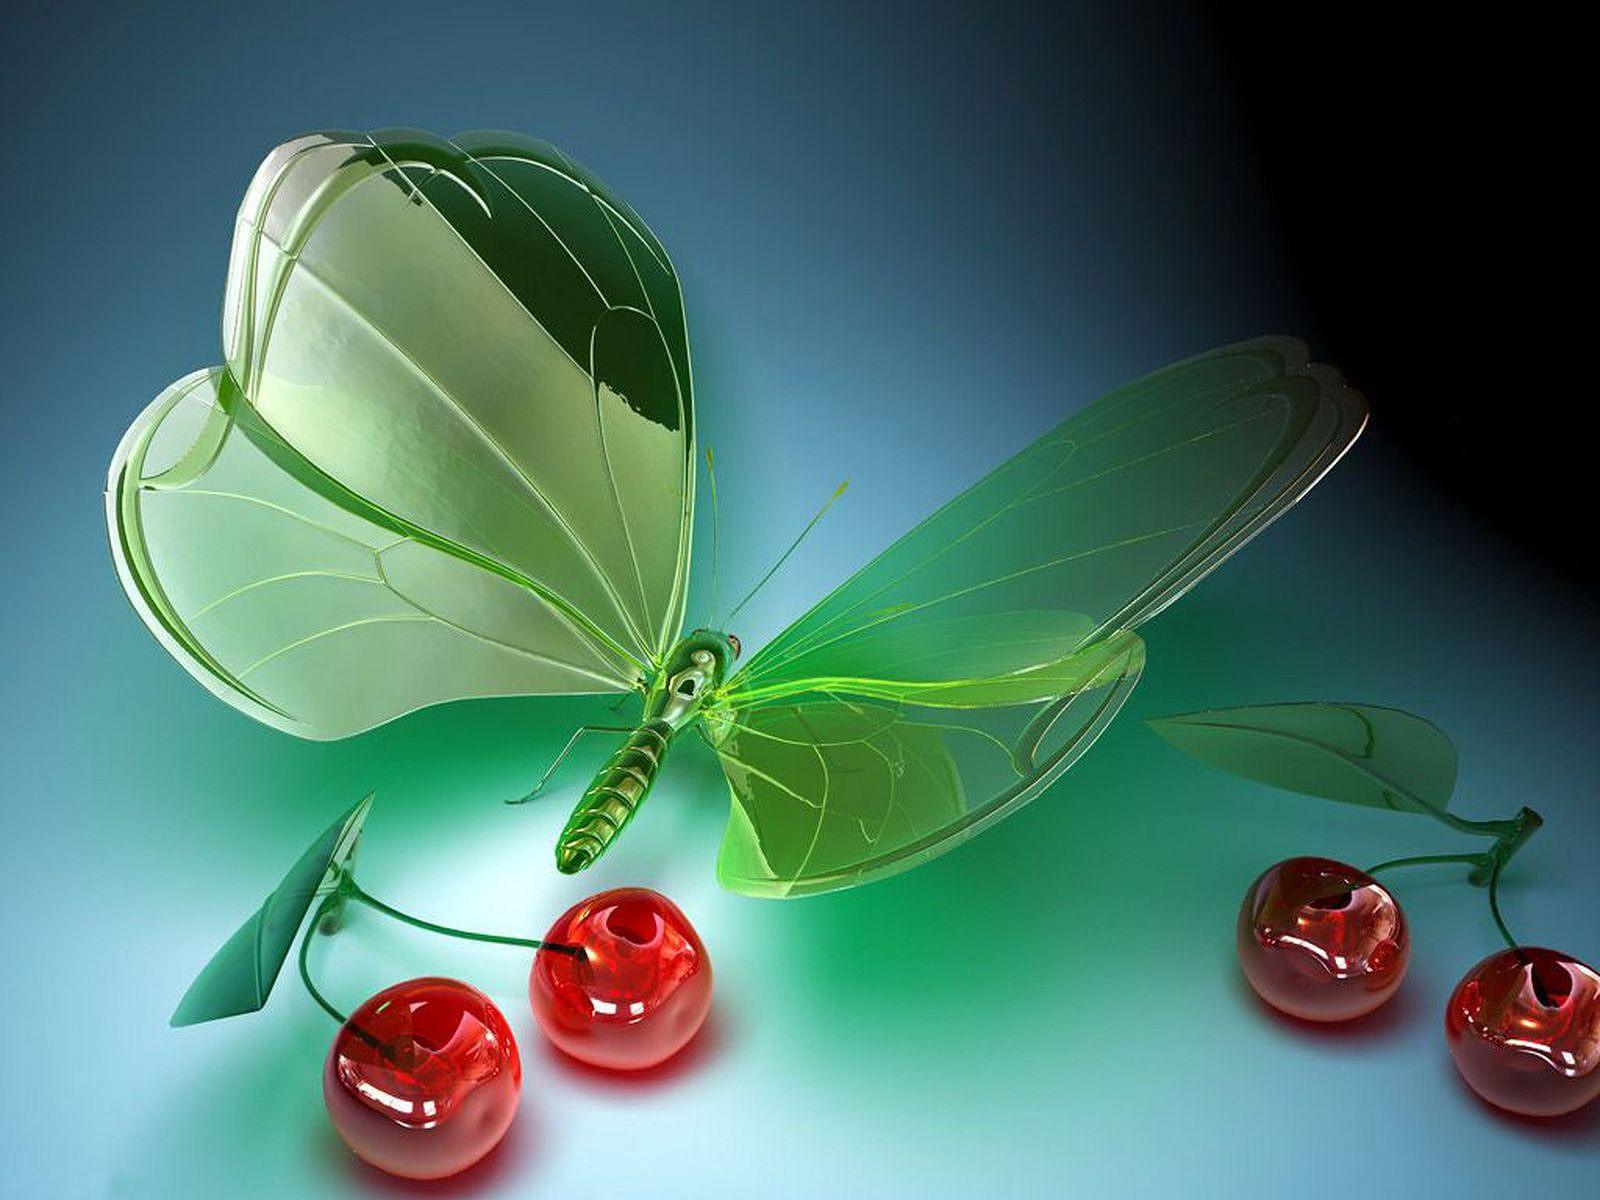 3D Glass Butterflies with Apple Free PPT Background